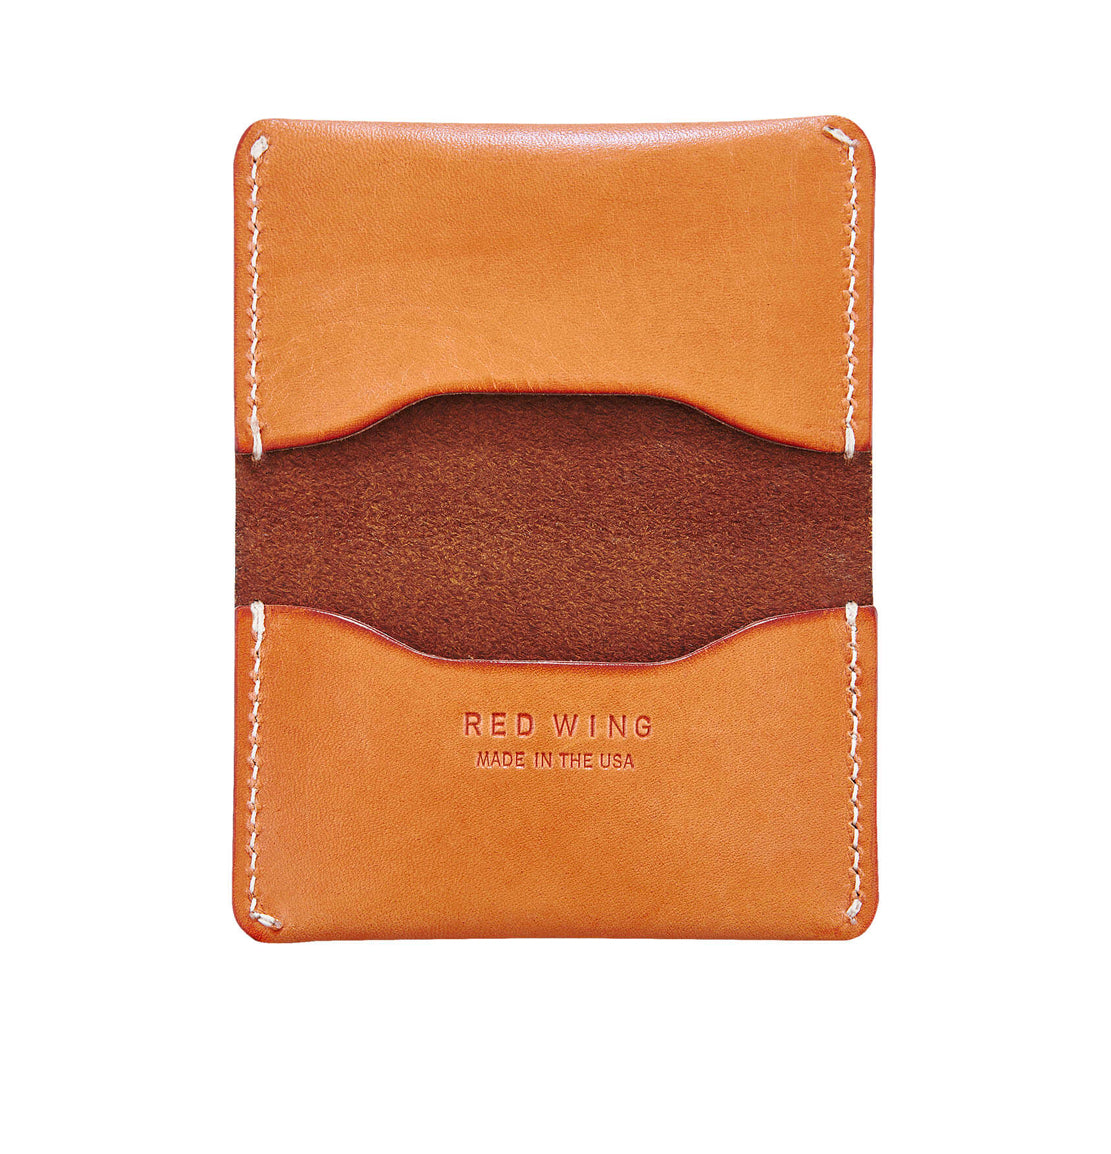 Red Wing Card Holder